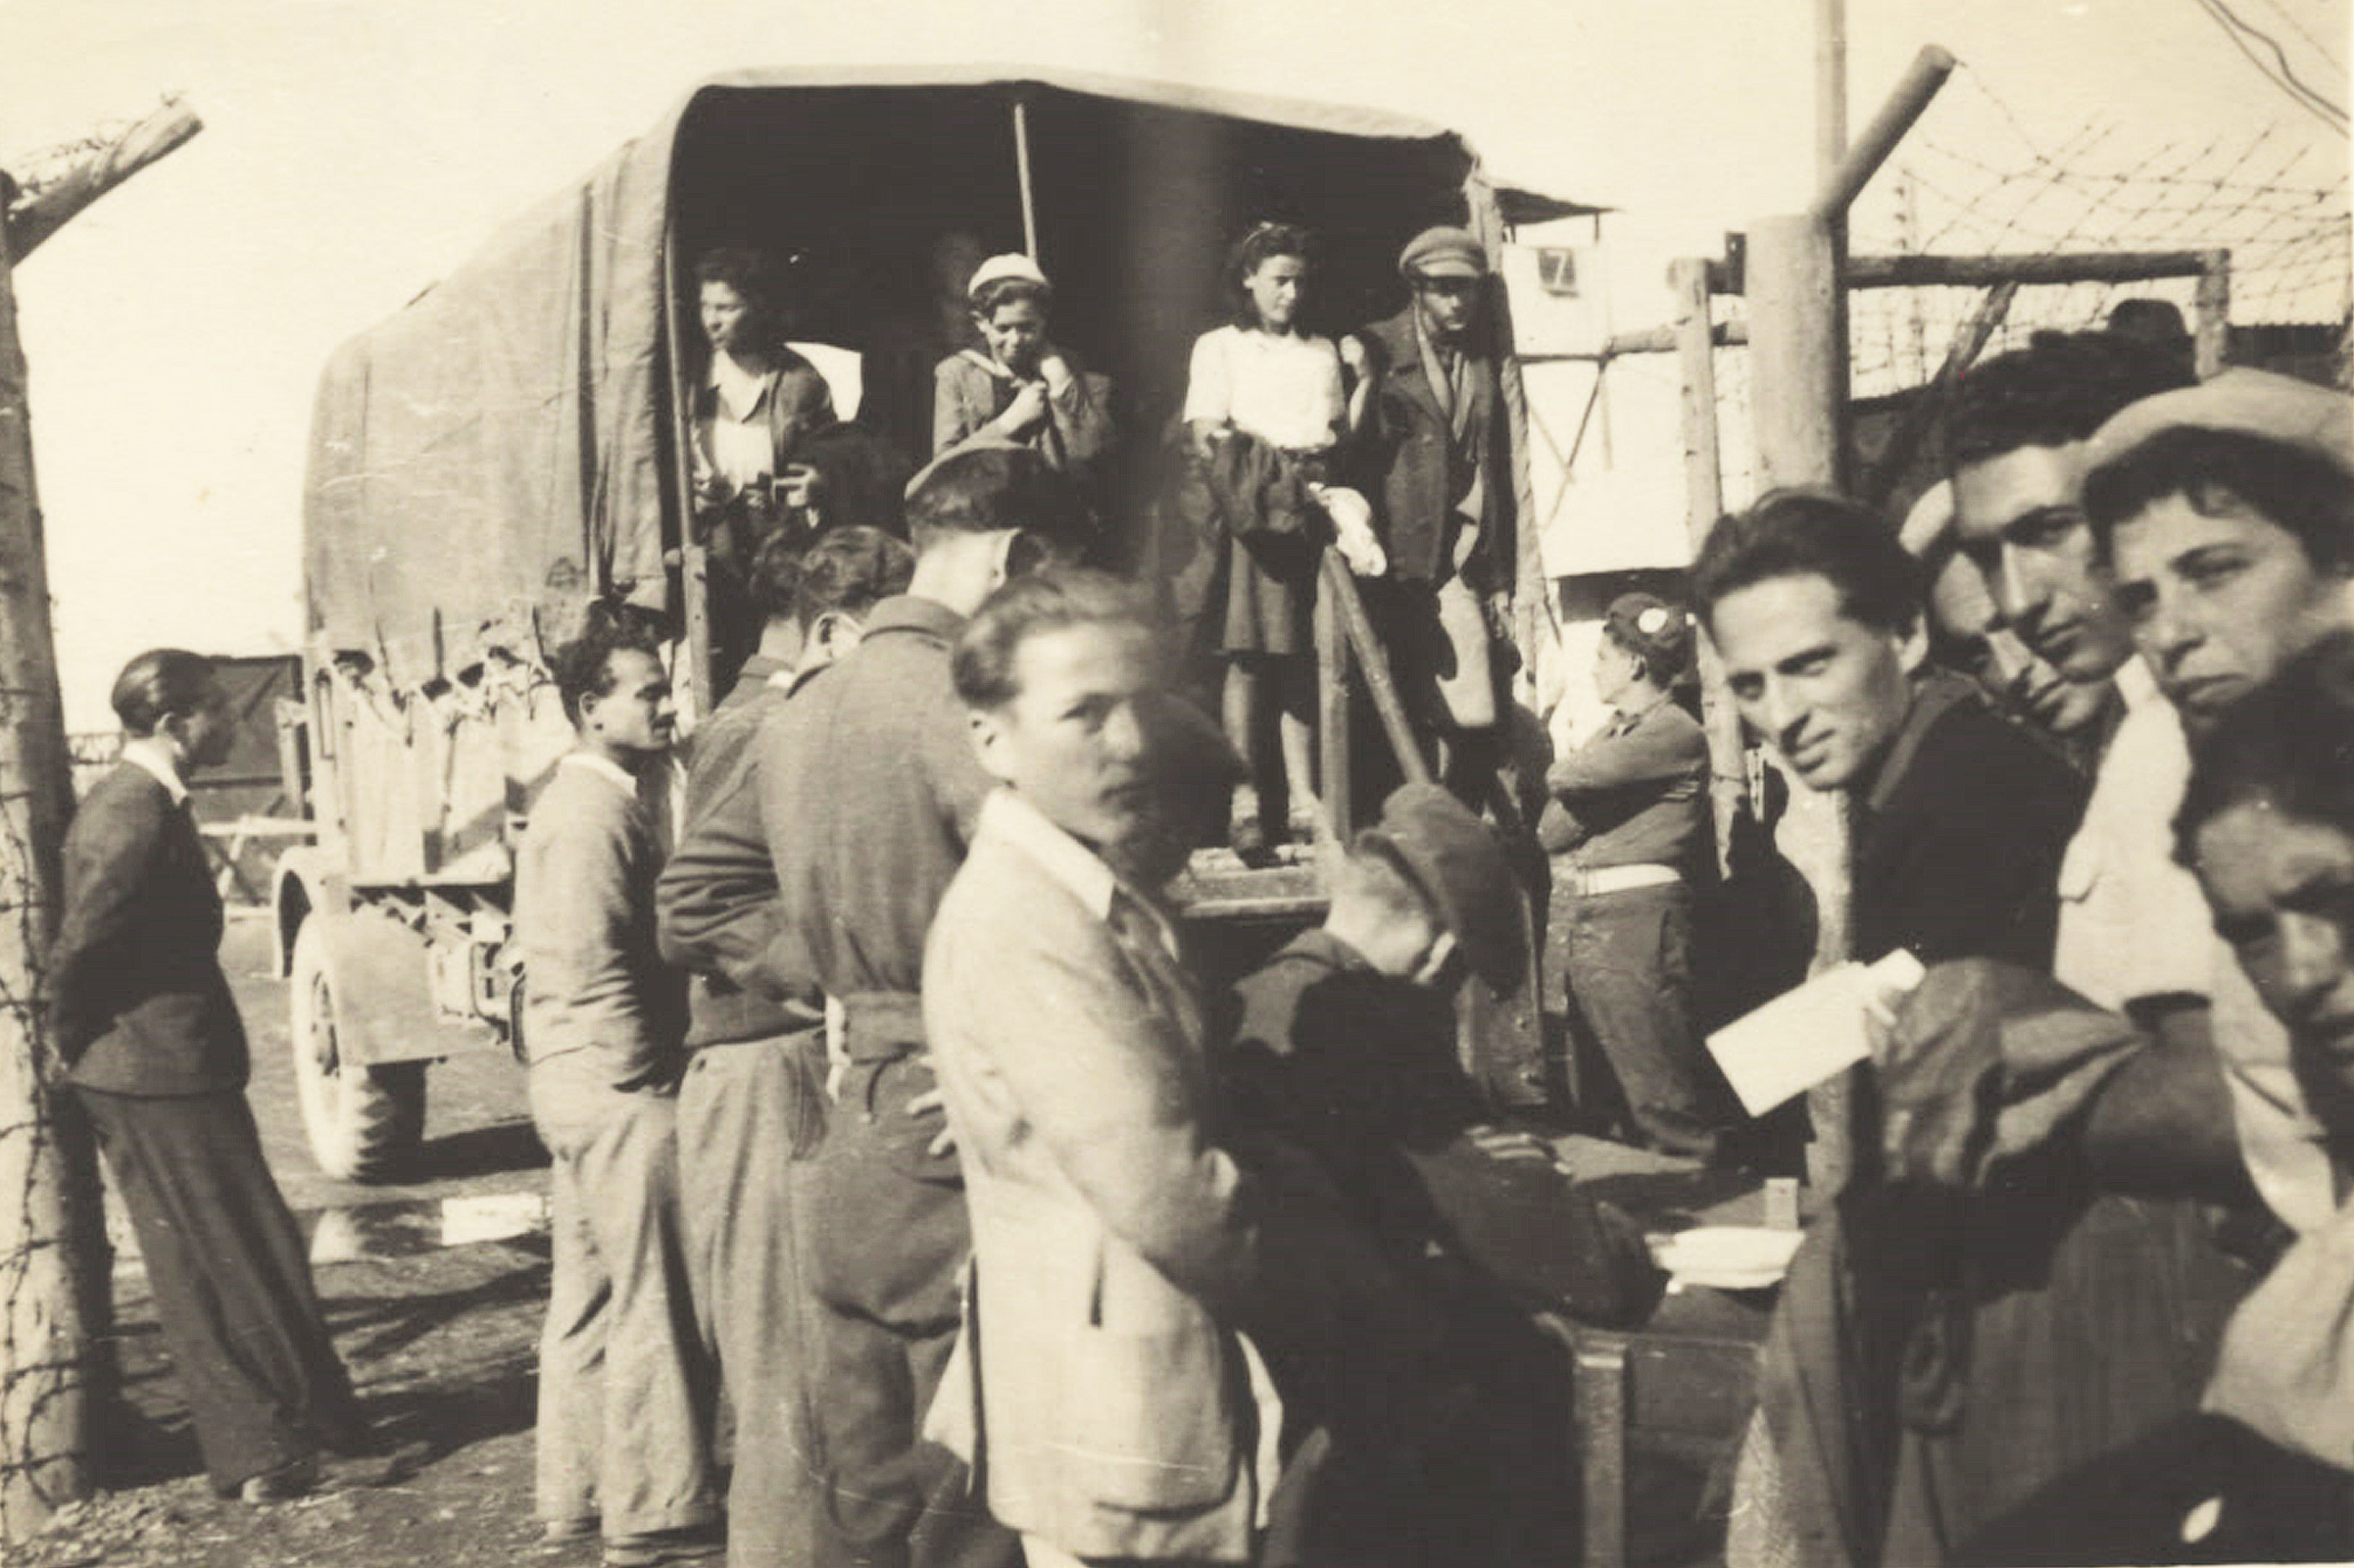 The immigrant group detained by the British Mandate Authority in Cyprus.